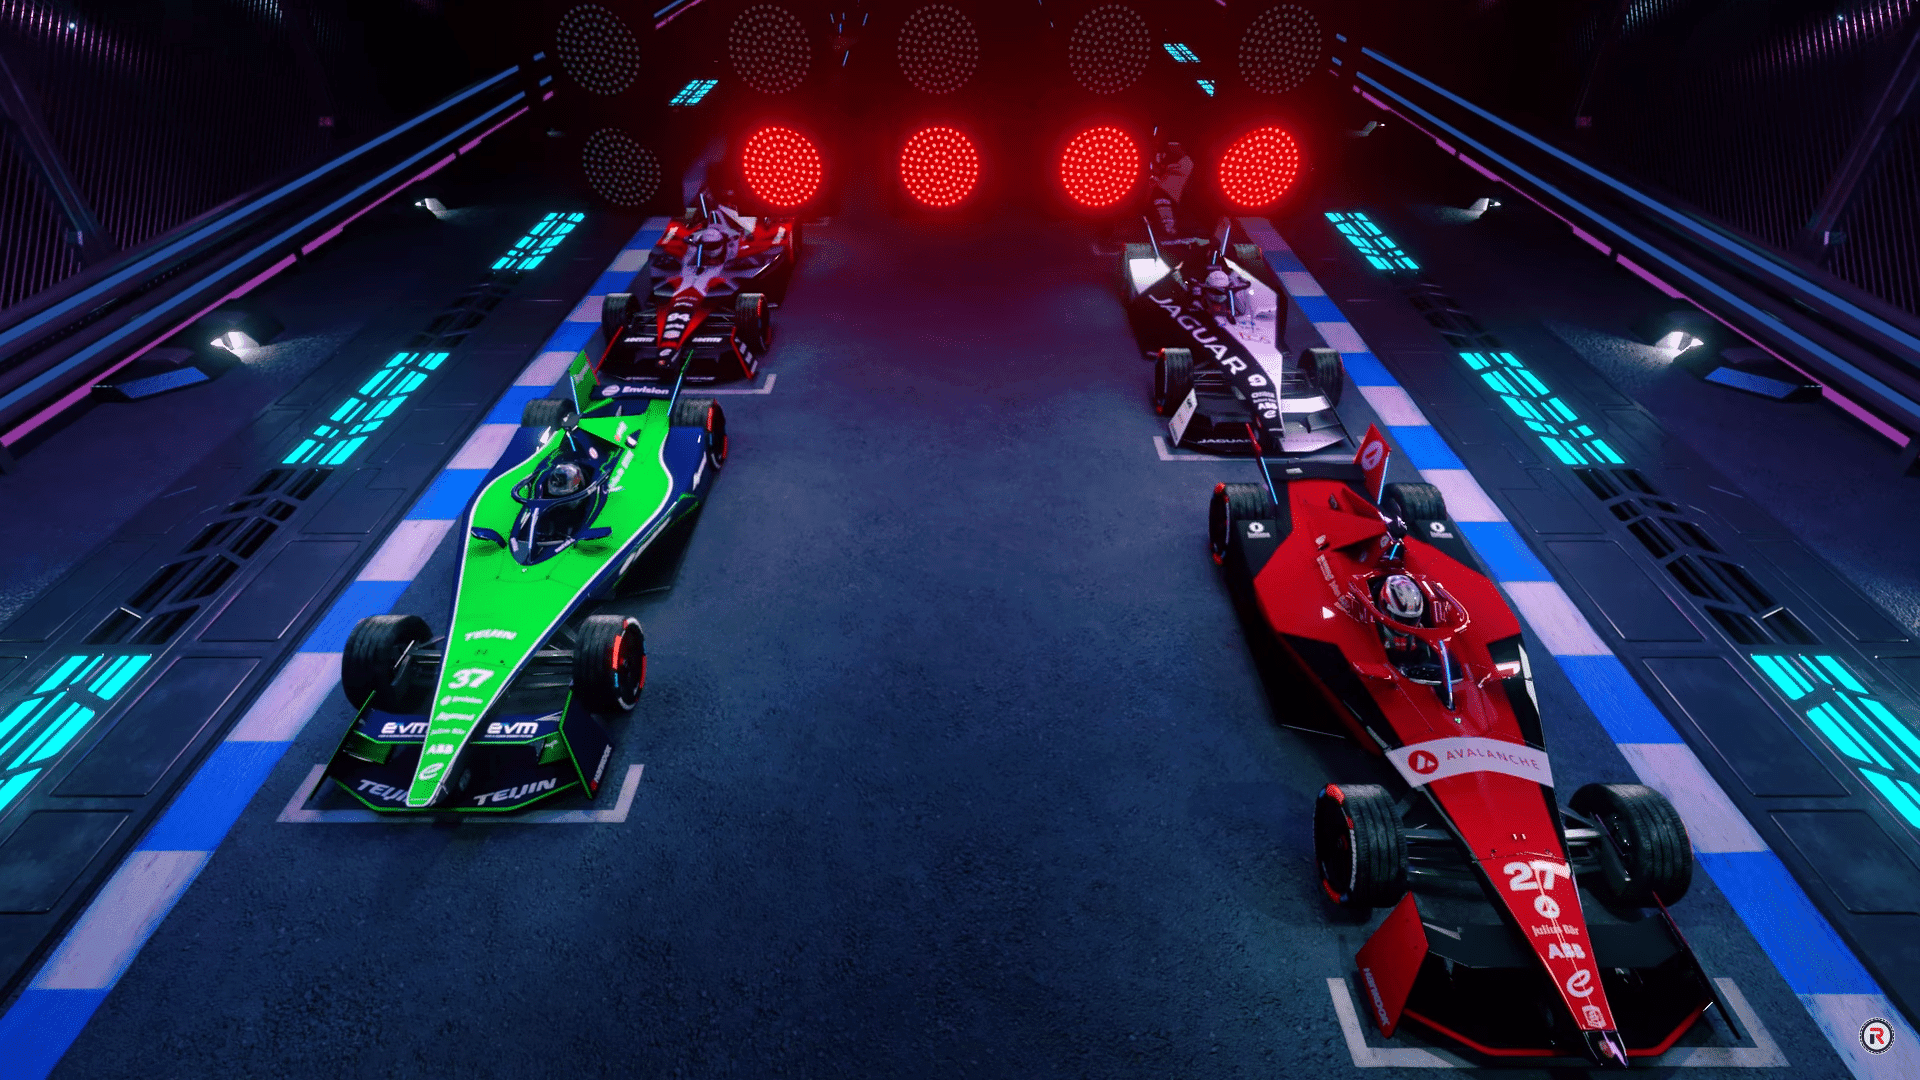 Formula E: High Voltage, a licensed game by Animoca, innovatively uses NFTs to bring a Play & Earn concept to the REVV Motorsport ecosystem.